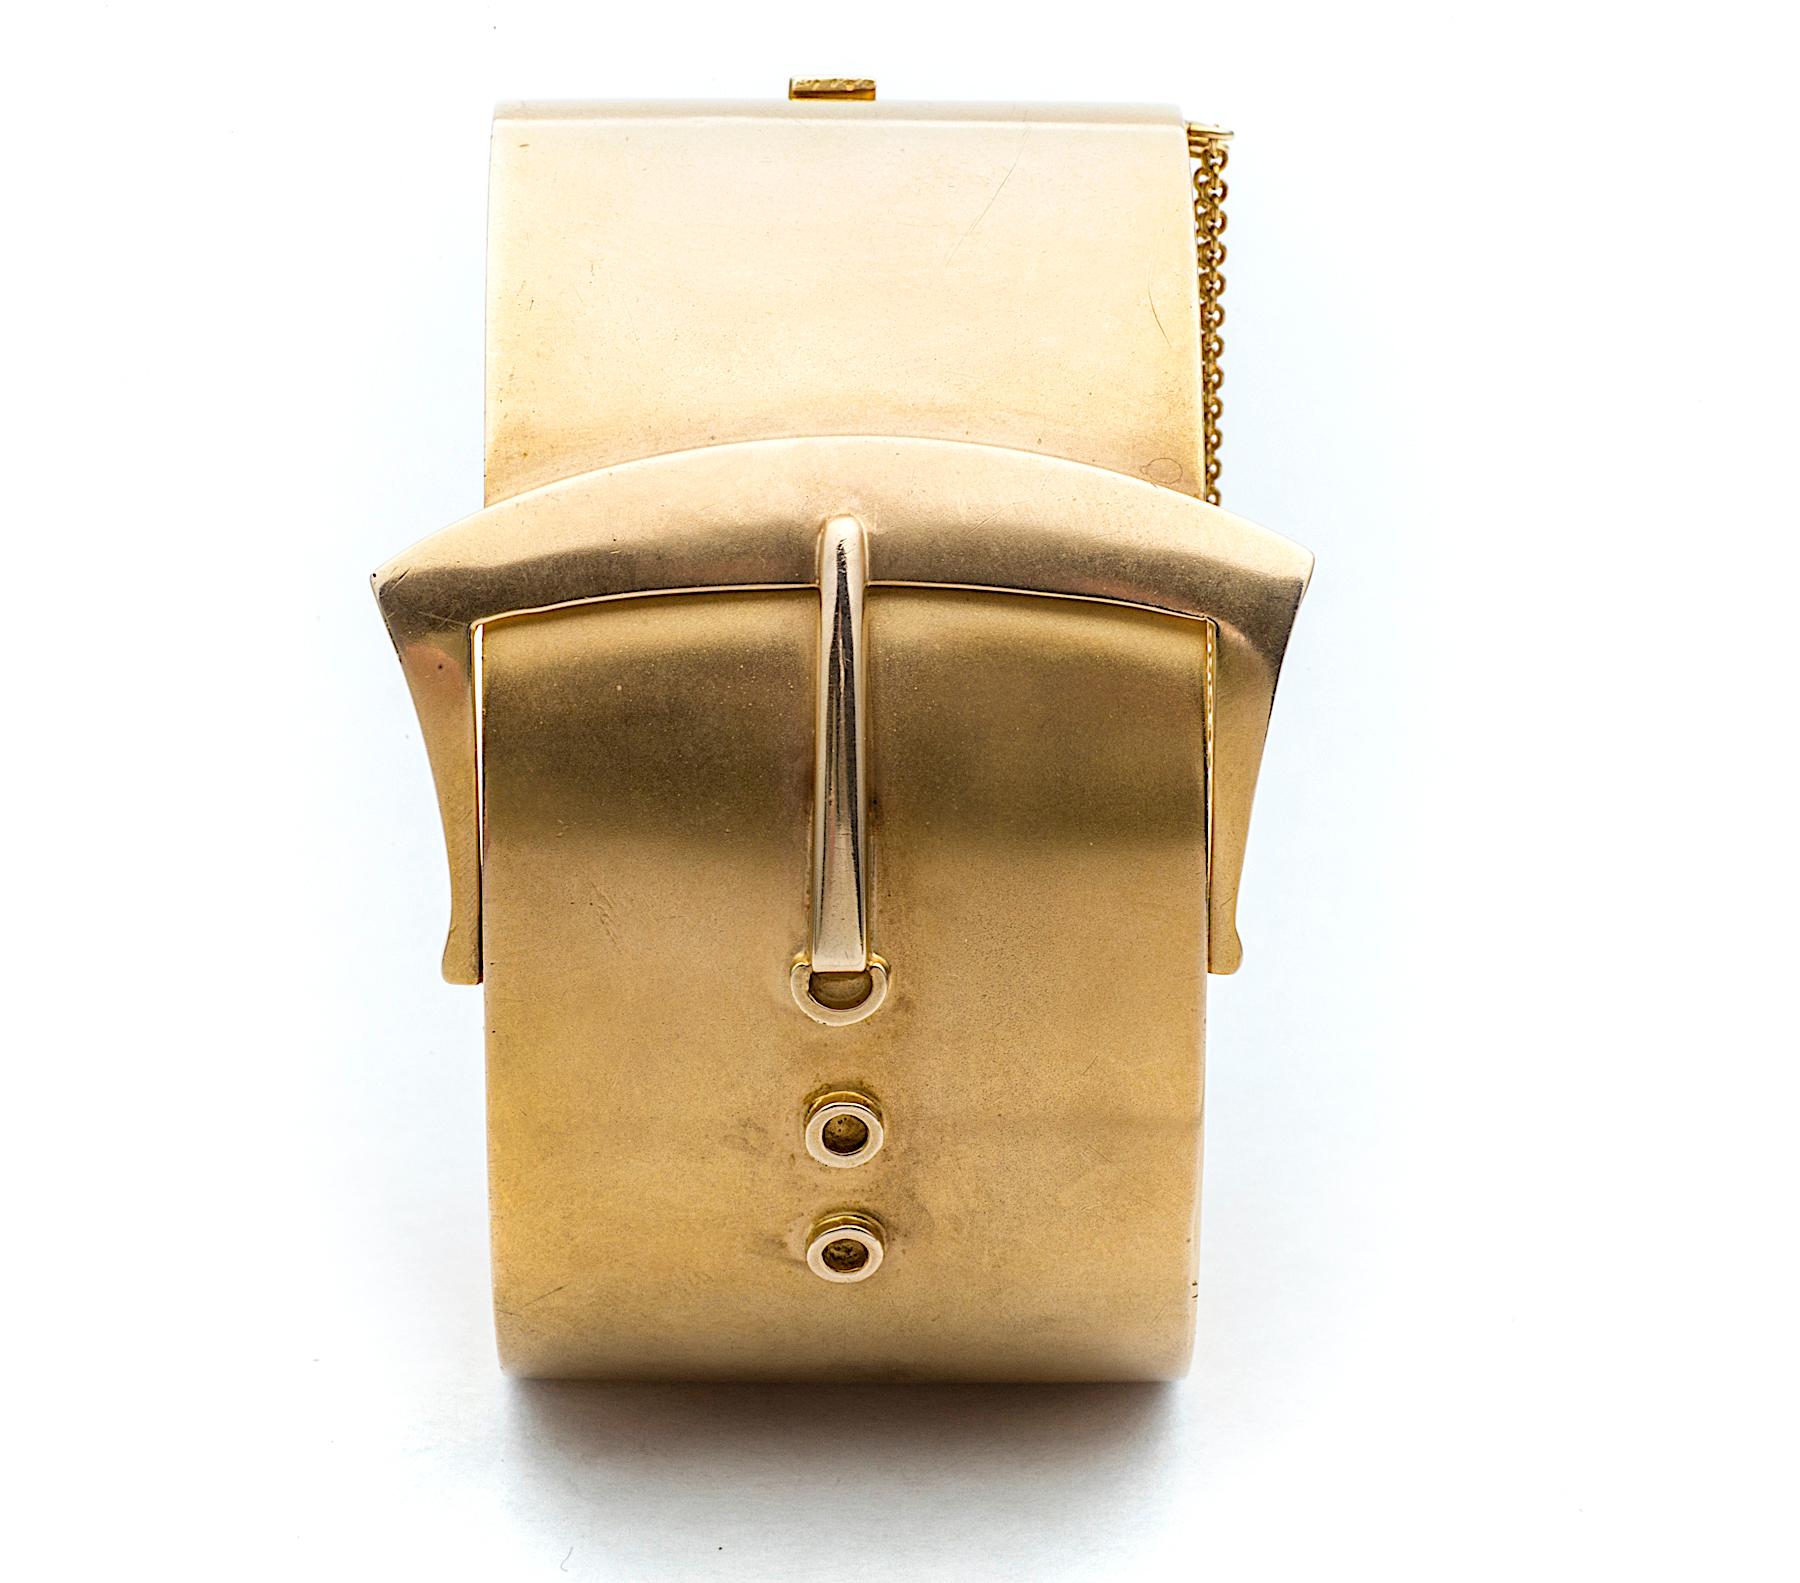 Buckle up in style with this extraordinary wide Victorian cuff bracelet!  With a warm honey colored patina, this handmade collectible bold buckle bracelet is an elegant one-of-a-kind wardrobe statement.  Hinge closure.  1 7/8